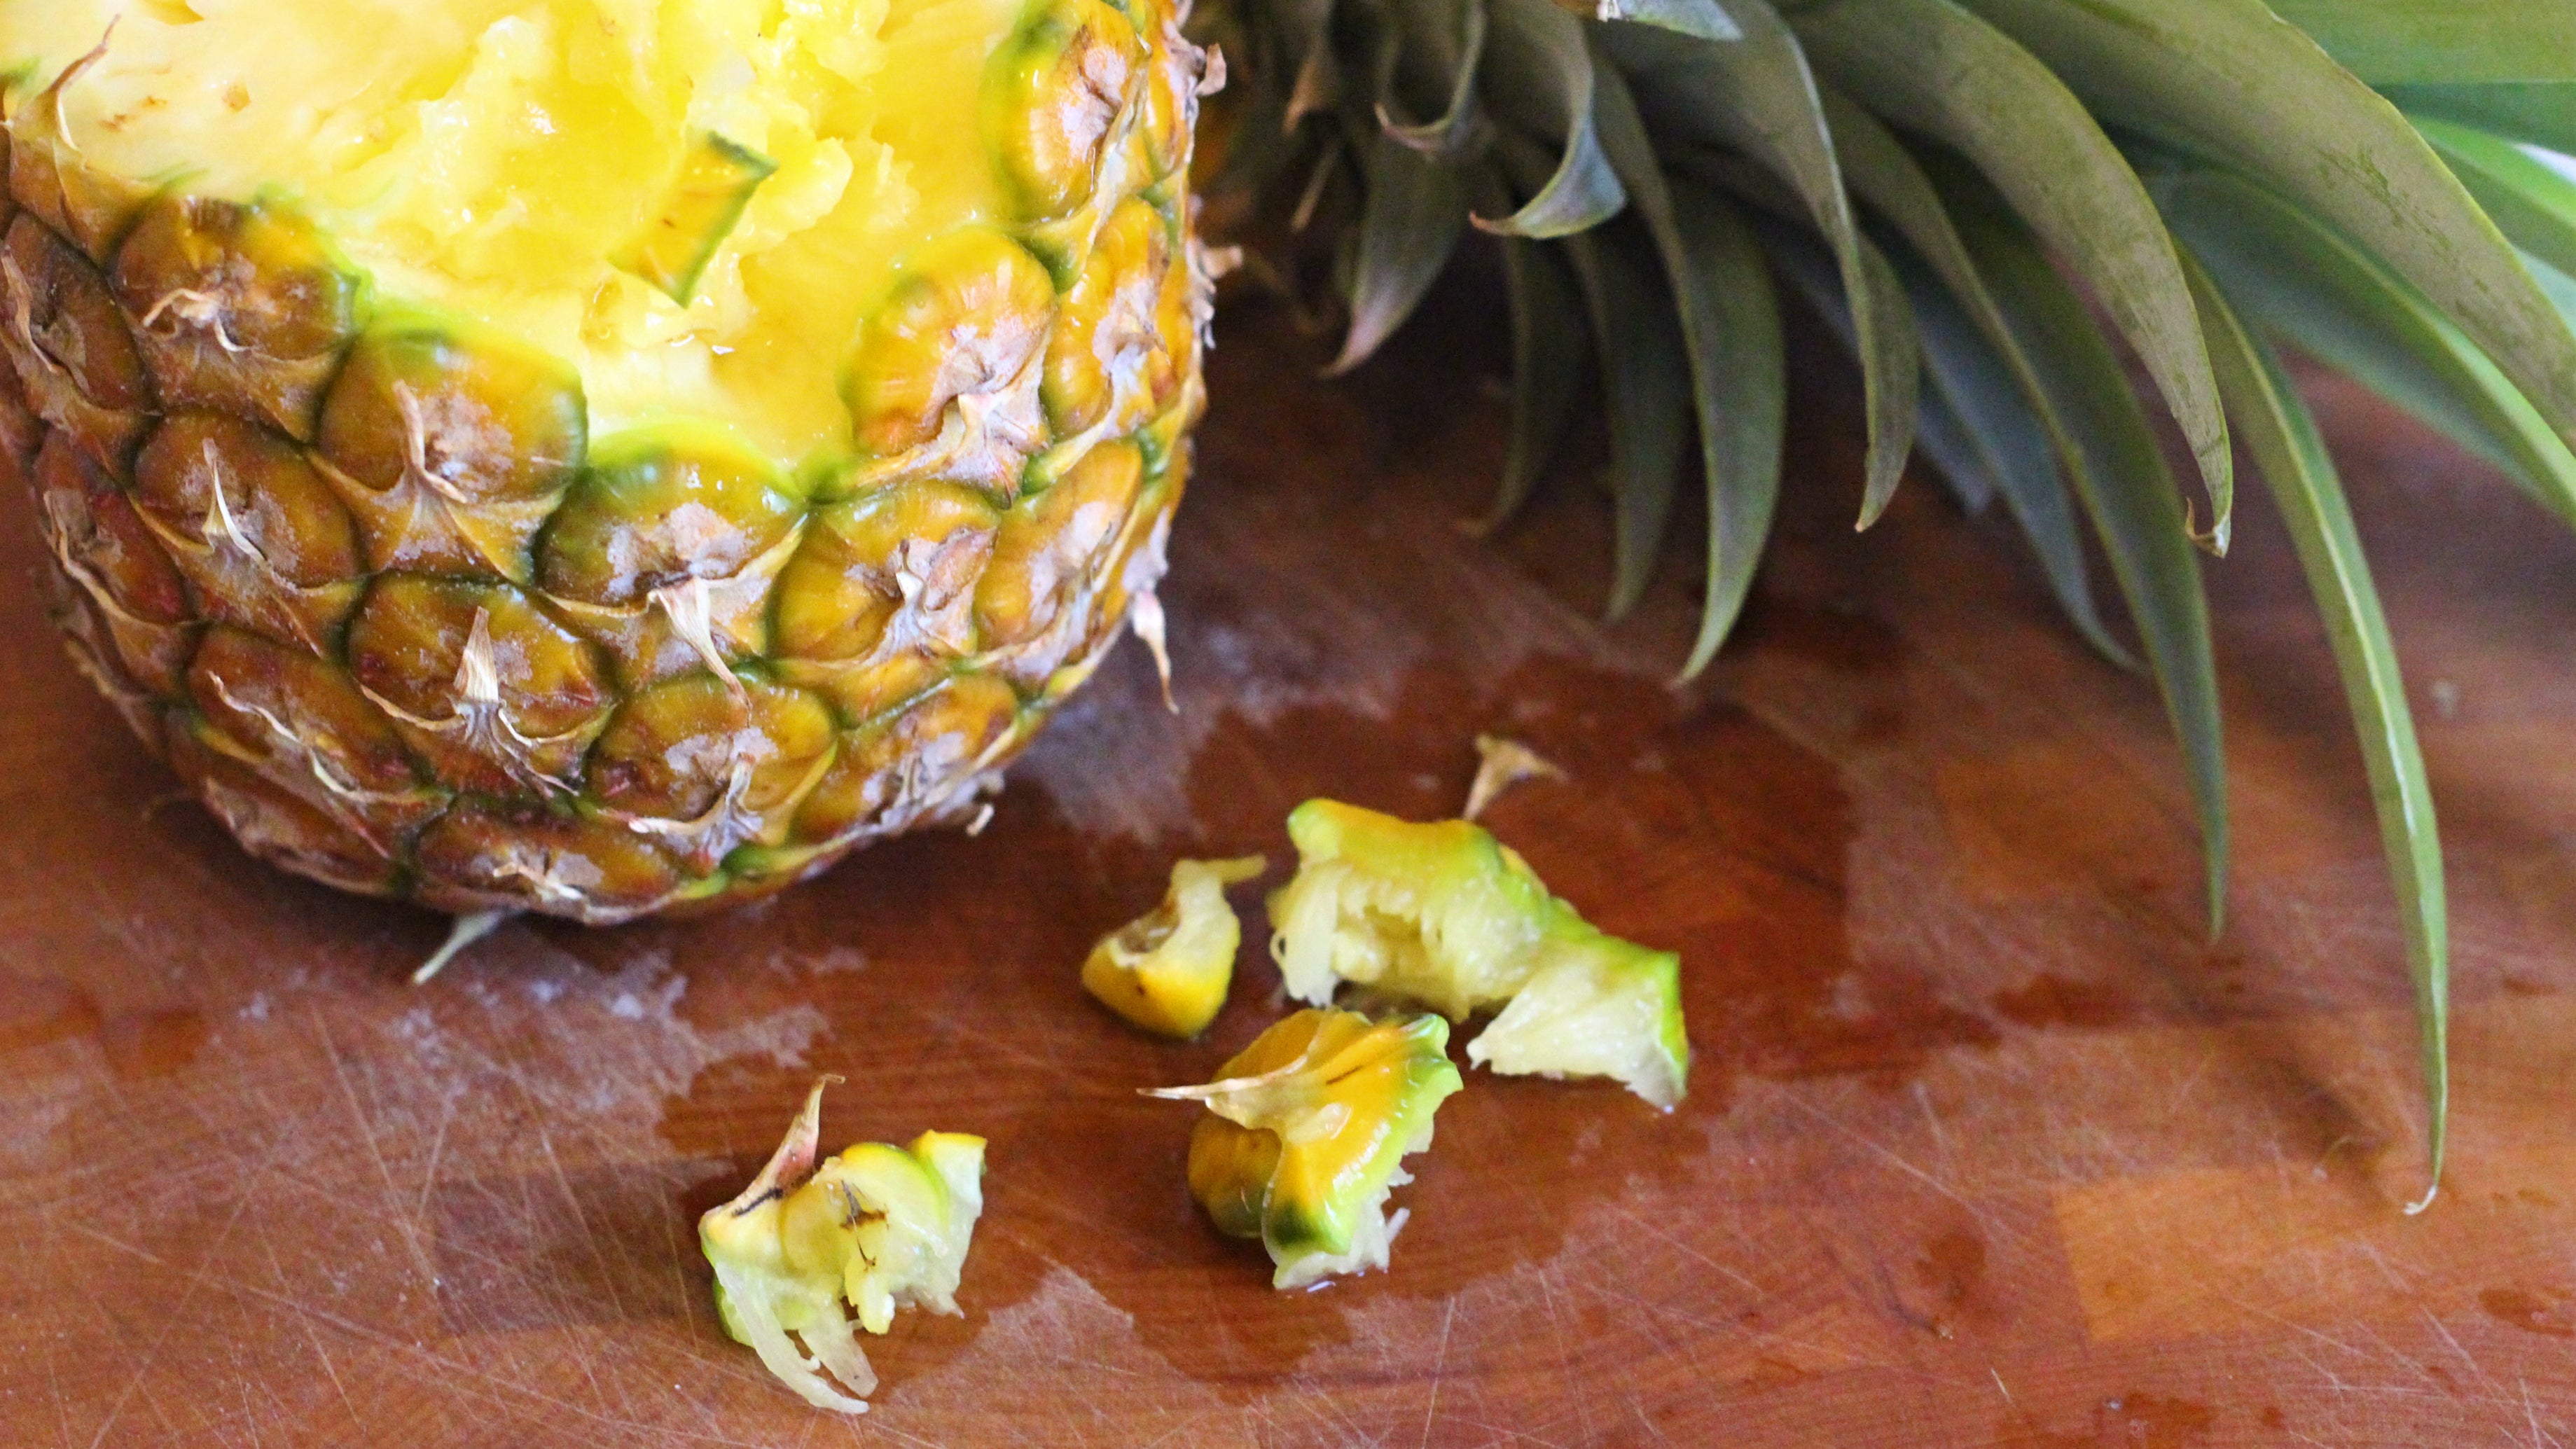 This Viral Pineapple Hack Has Some Issues